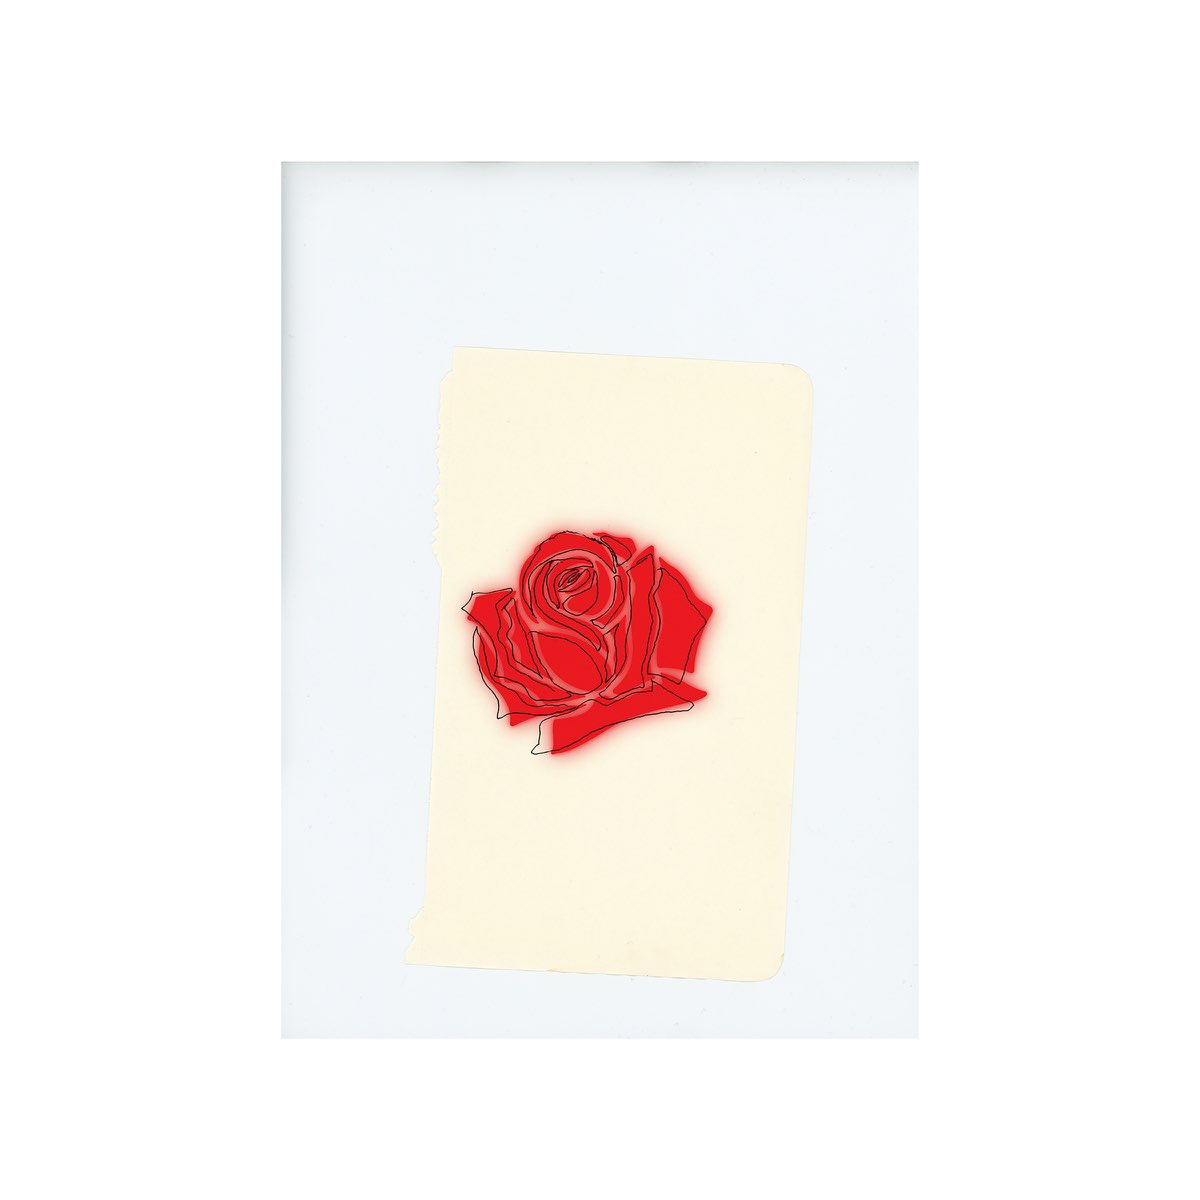 Vou Jogar – Song by Lany – Apple Music